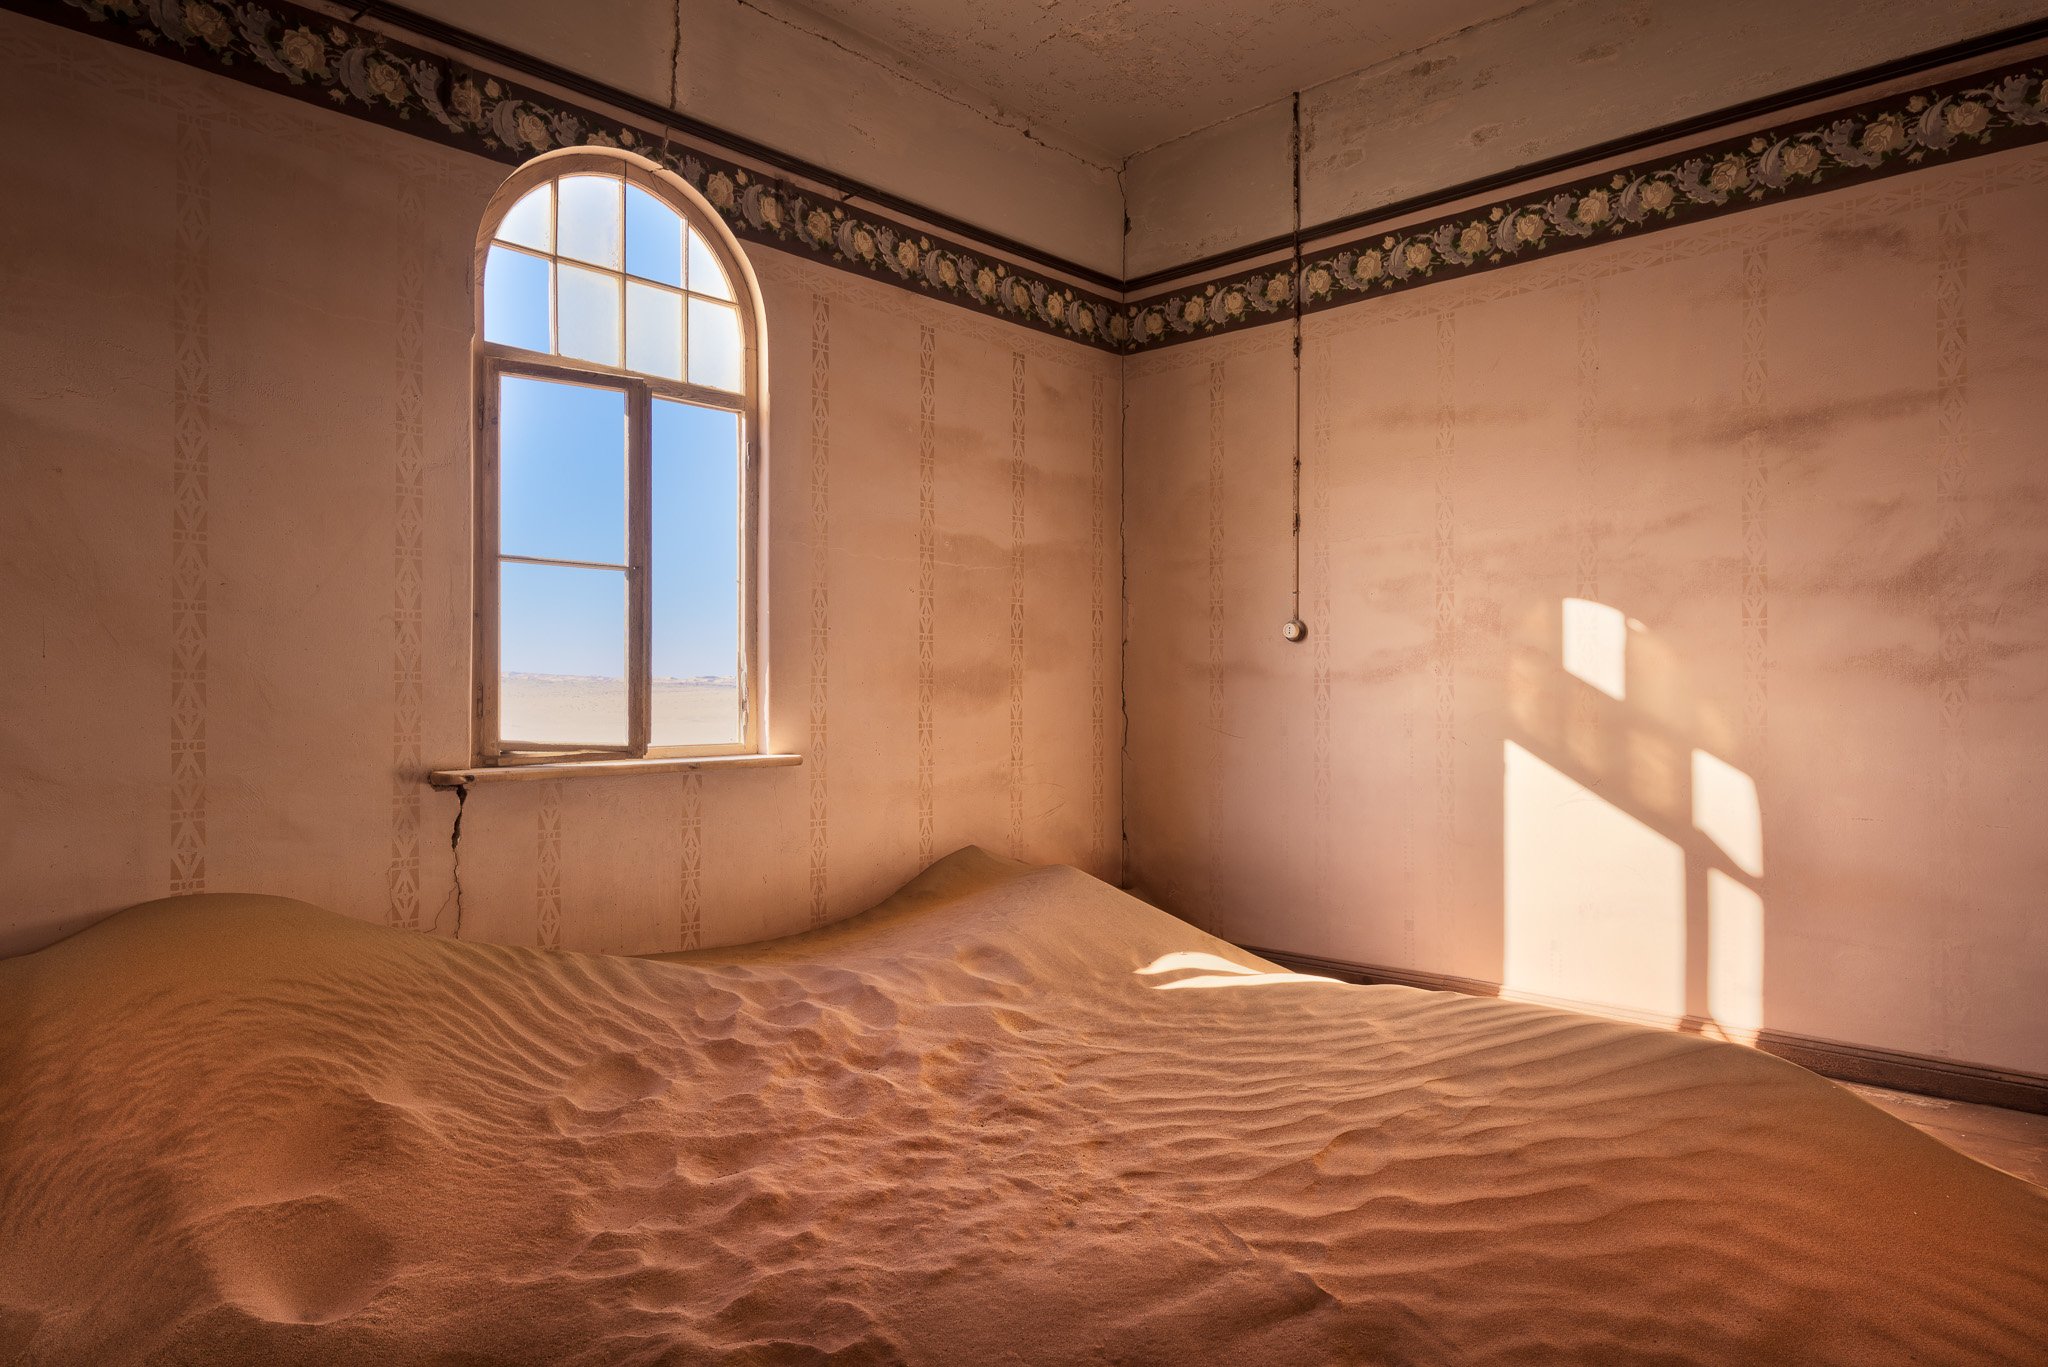 abandoned, Africa, african, architecture, barren, blue, building, city, climate, color, colour, decayed, demolition, desert, diamond, door, doorway, drought, dry, dune, empty, environment, german, ghost, green, haunted, historical, history, home, house, i, Andrey Omelyanchuk